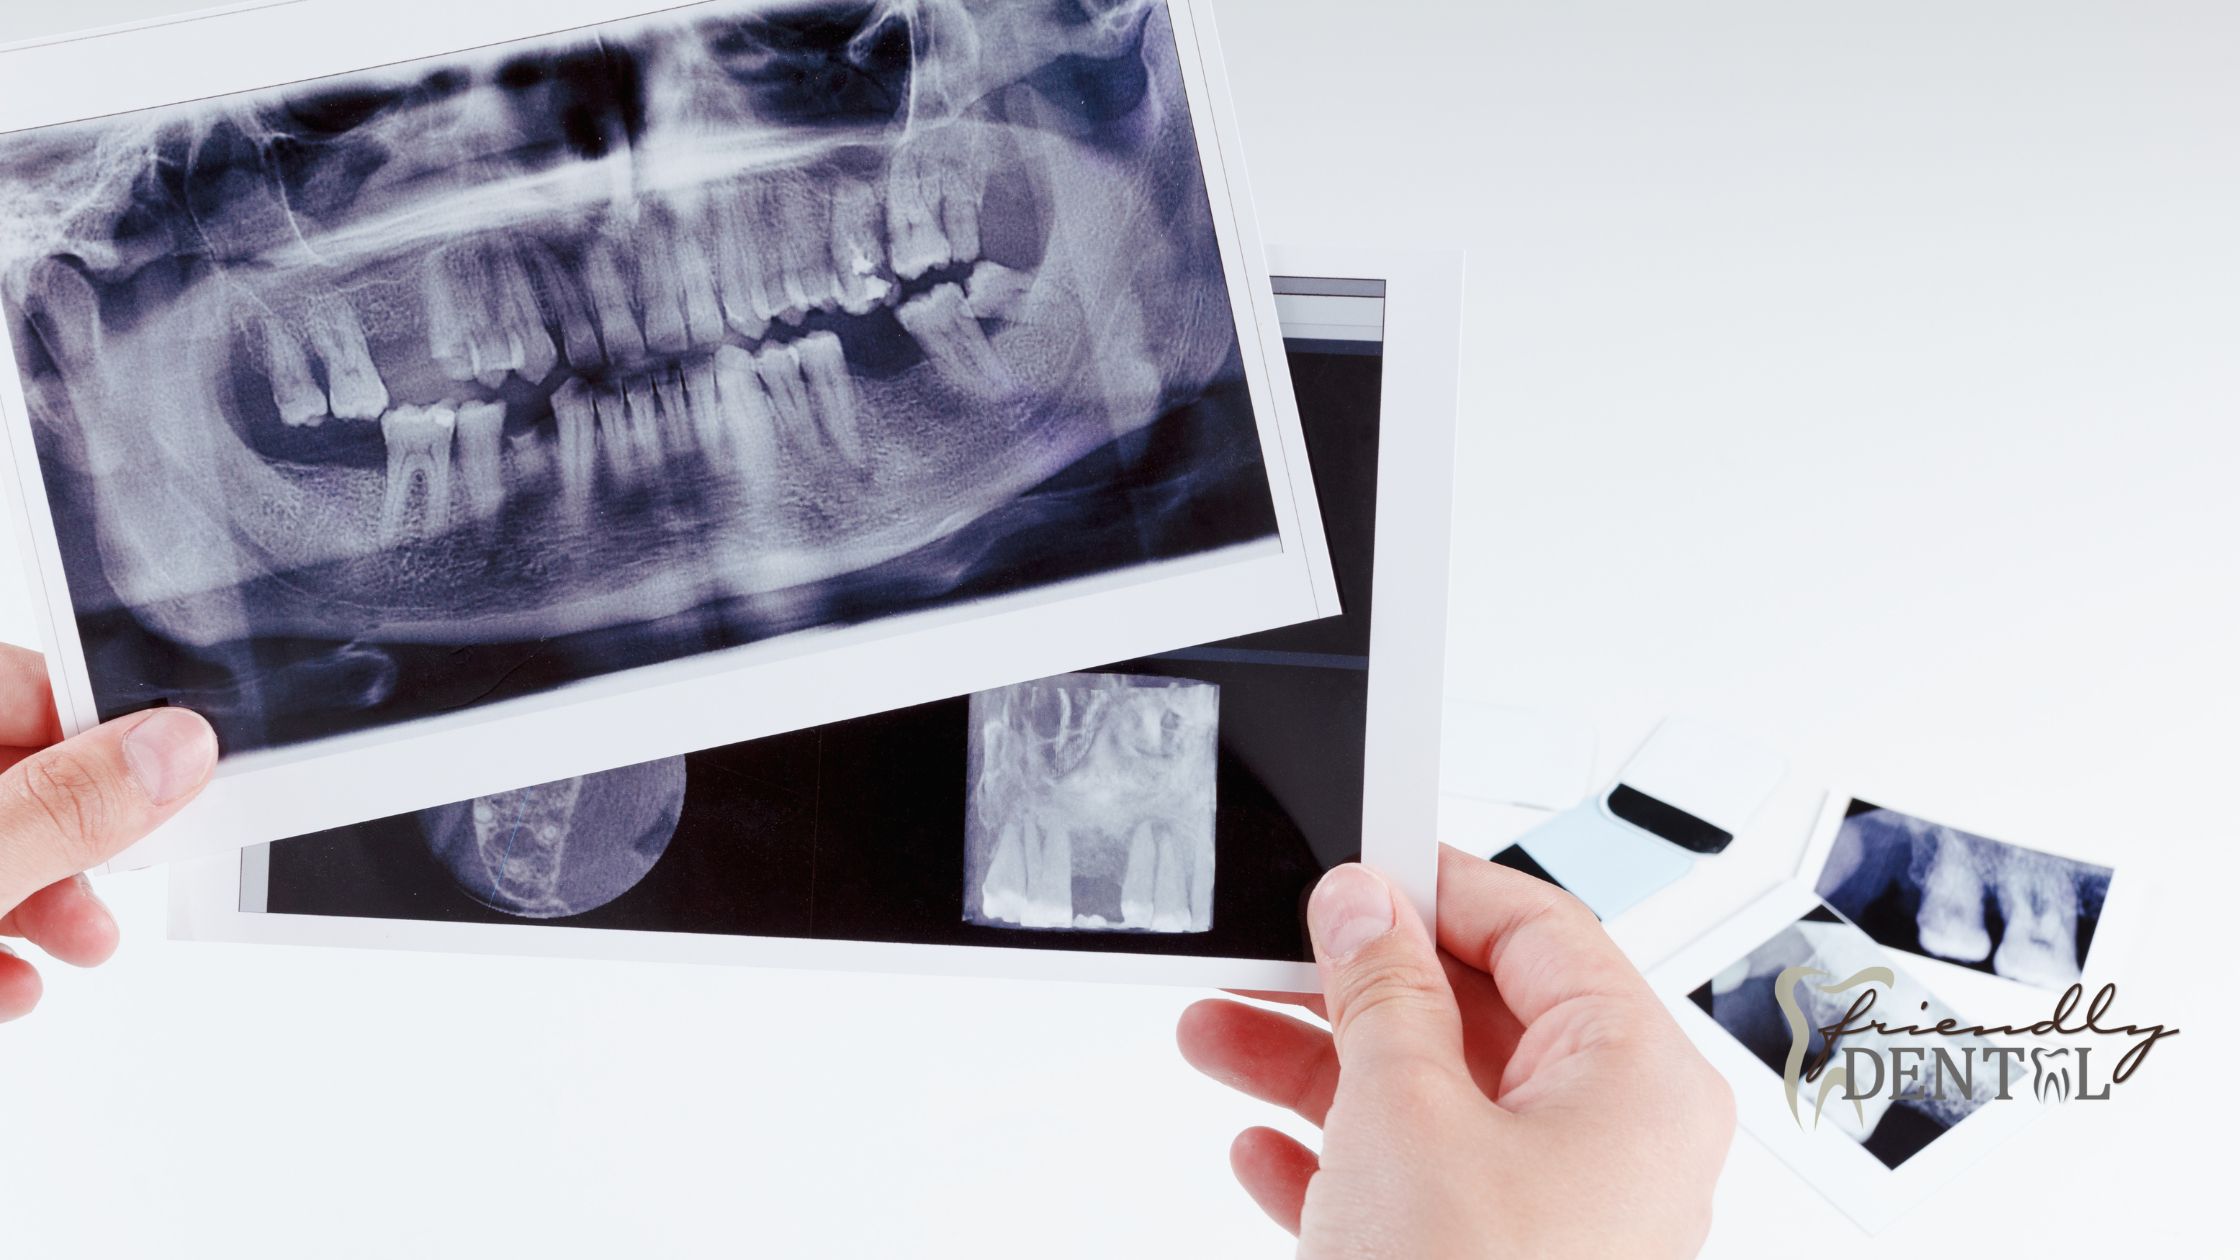 How Safe Are Dental X-Rays?